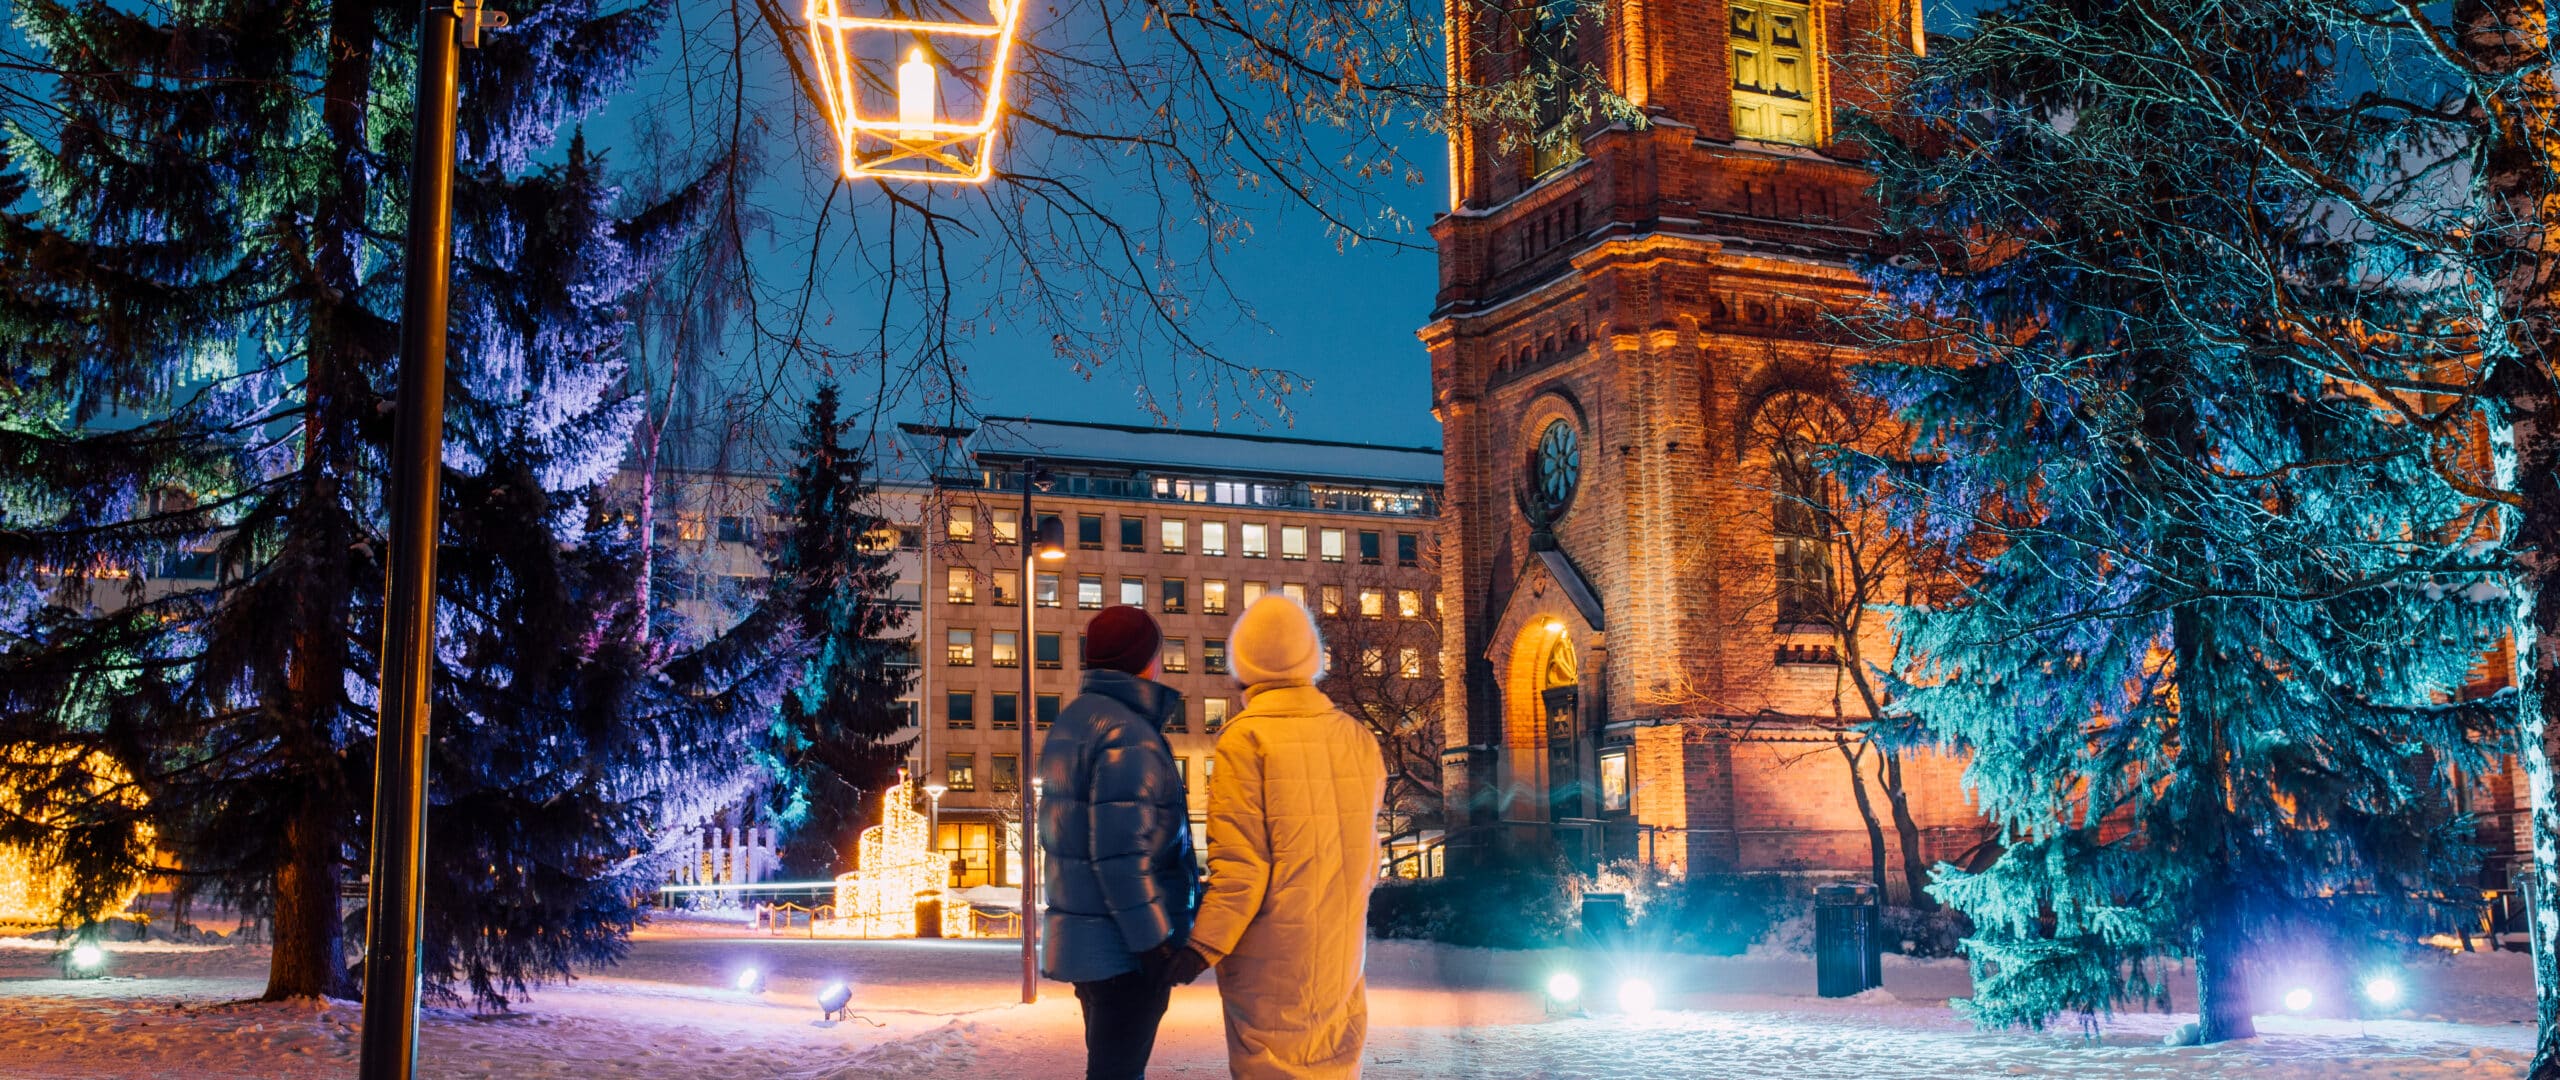 Two persons standing in Jyväskylä's snowy Church Park.